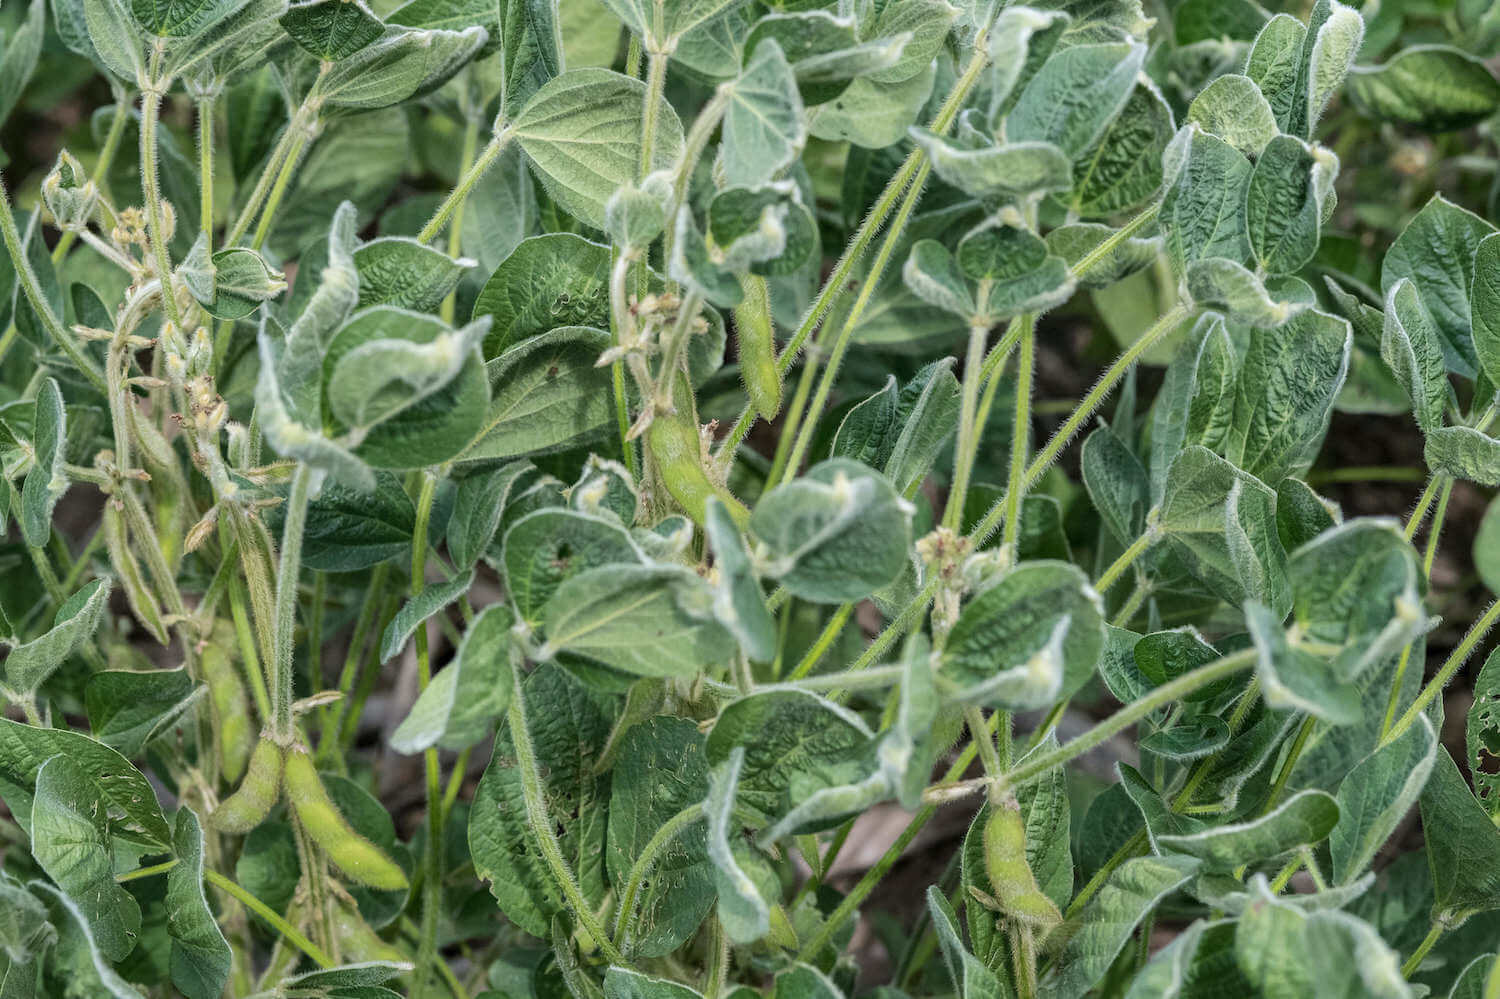 Soybeans with suspected dicamba damage north of Flatville, IL. (June 2020)